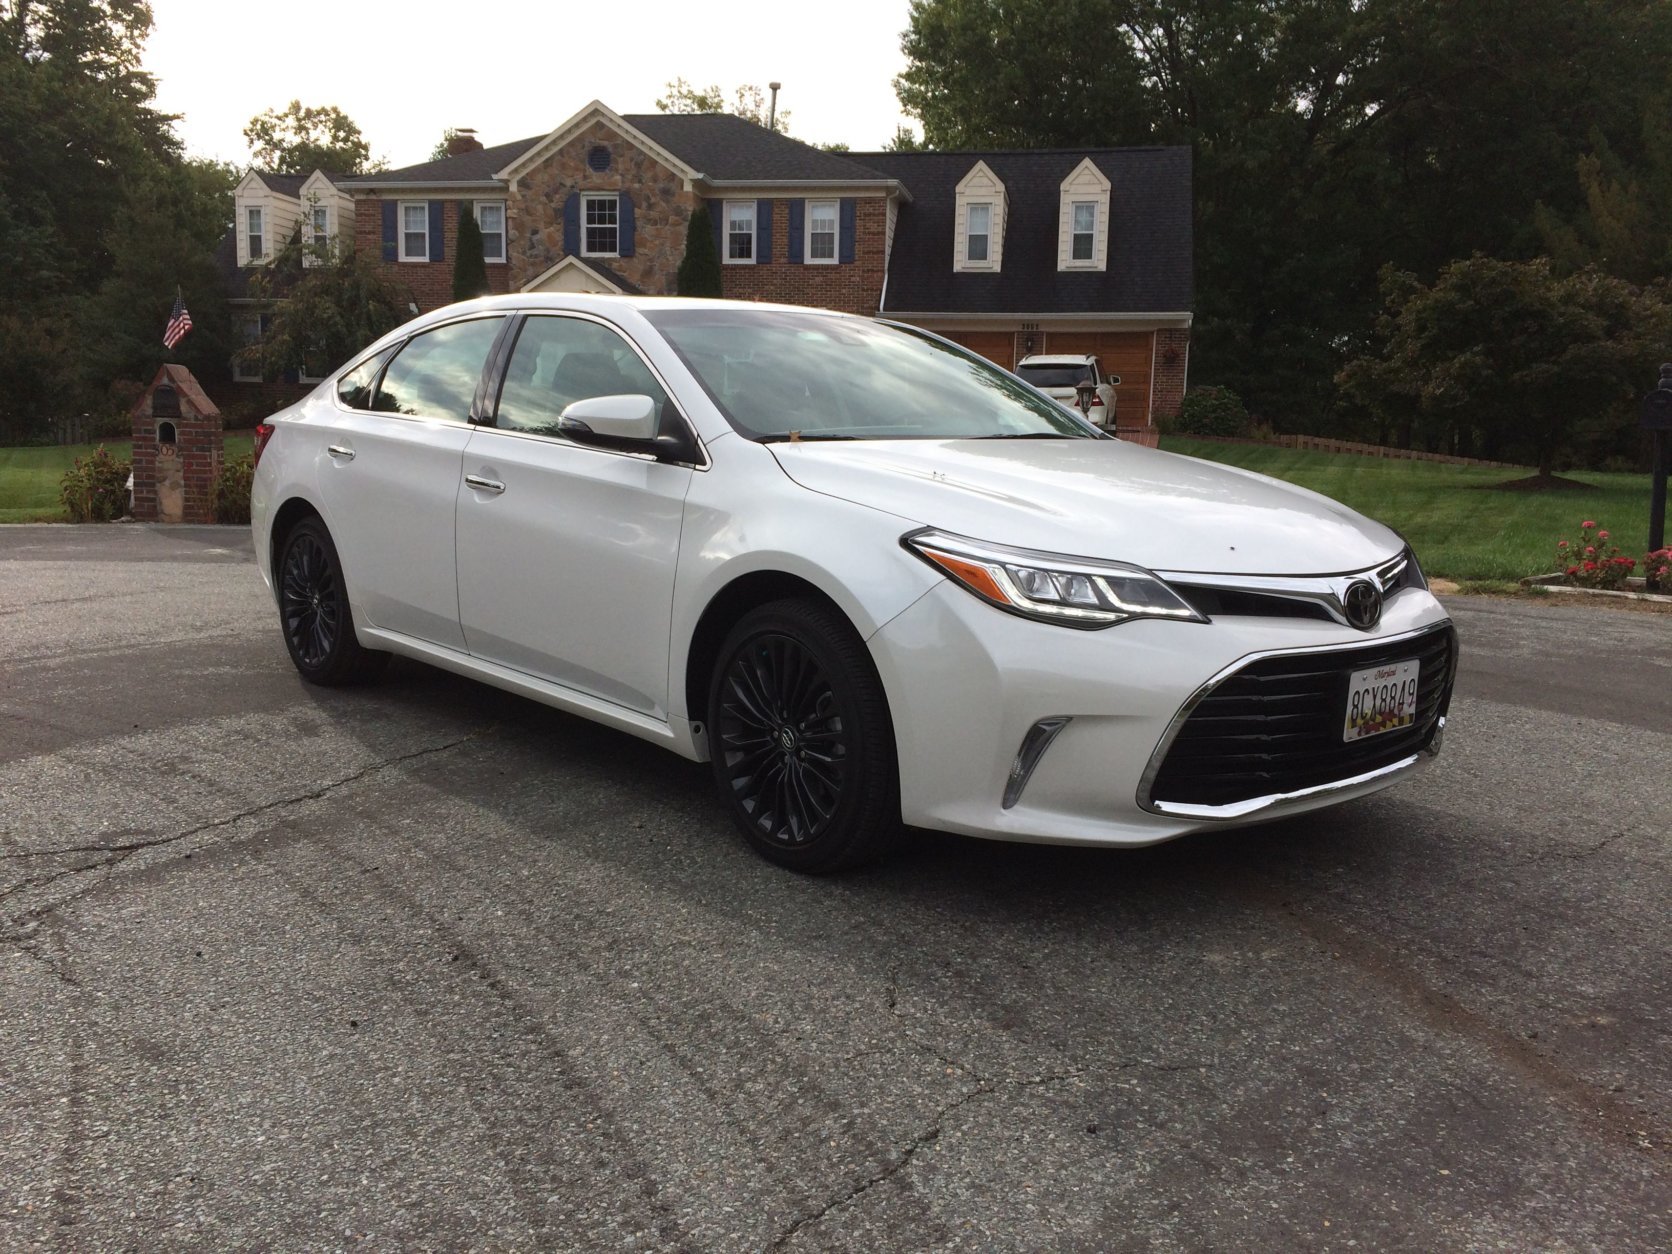 Car guy Mike Parris says the Avalon is the largest sedan from Toyota, and it has a premium look and feel. (WTOP/Mike Parris)